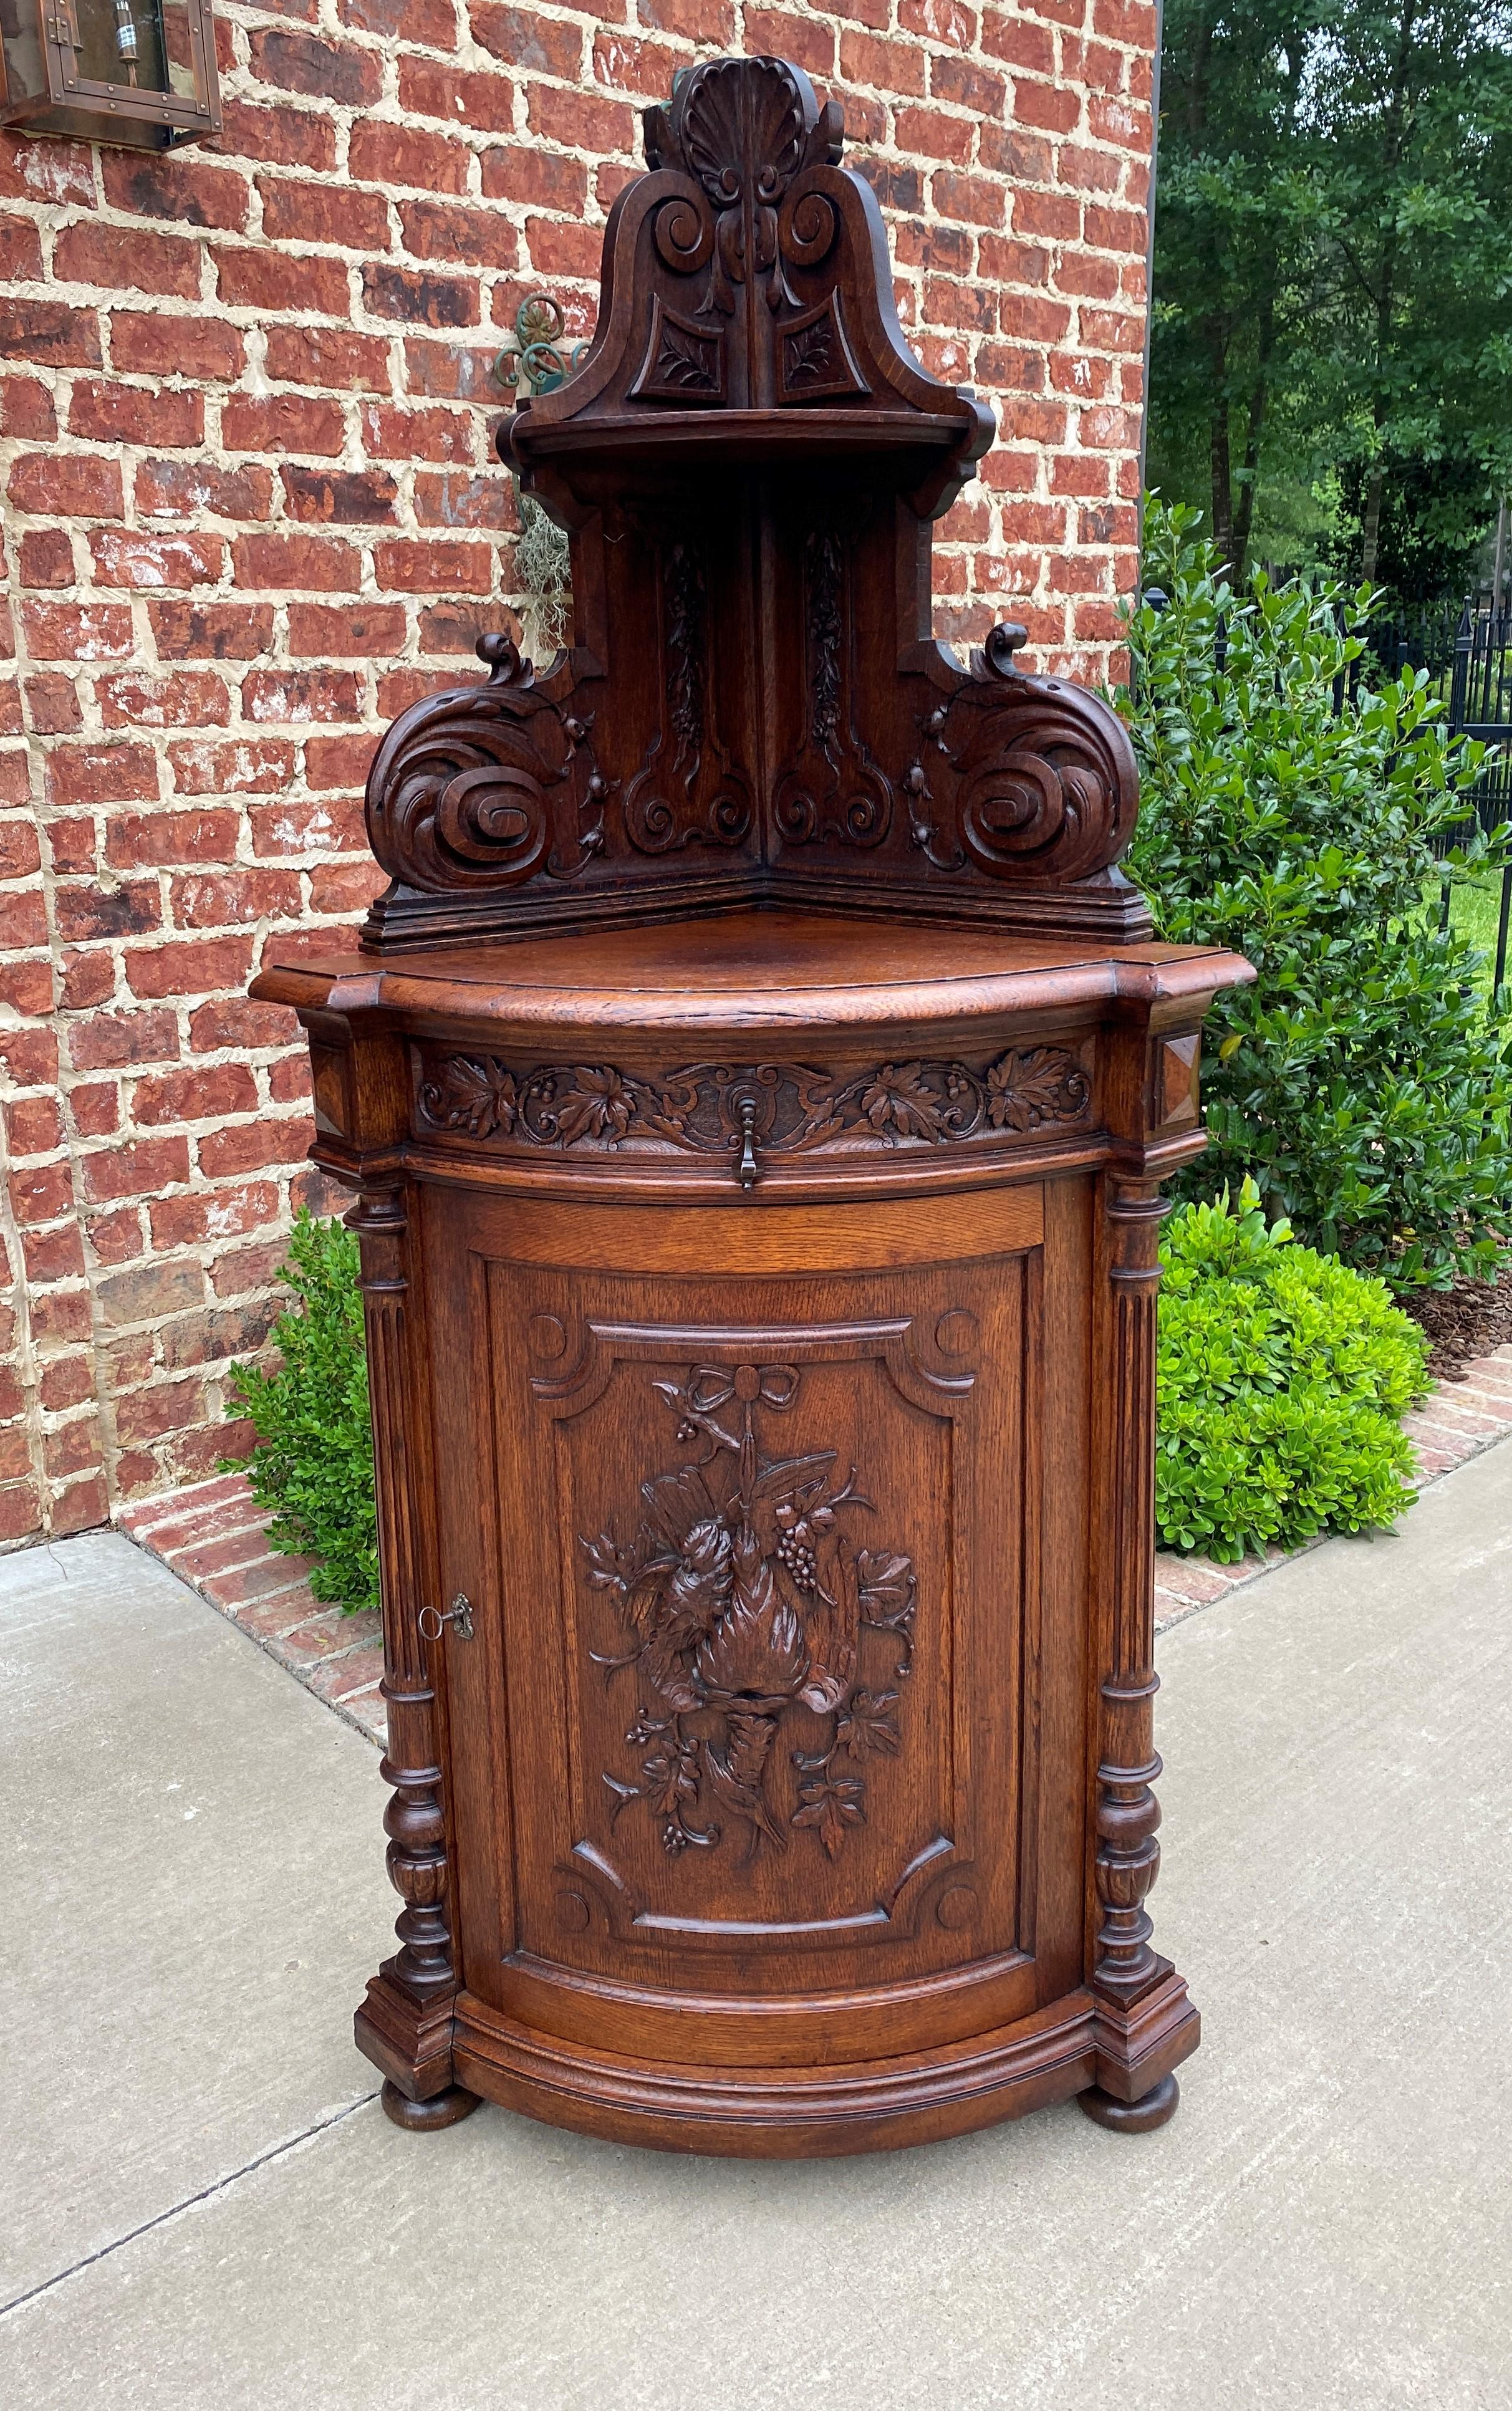 Beautifully carved Antique French oak black forest corner cabinet, bookcase, display or storage cabinet ~~c. 1880s.

Full of classic French flair~~beautifully carved ribbon and game birds on the lower door~~fluted columns~~corner cabinets are one